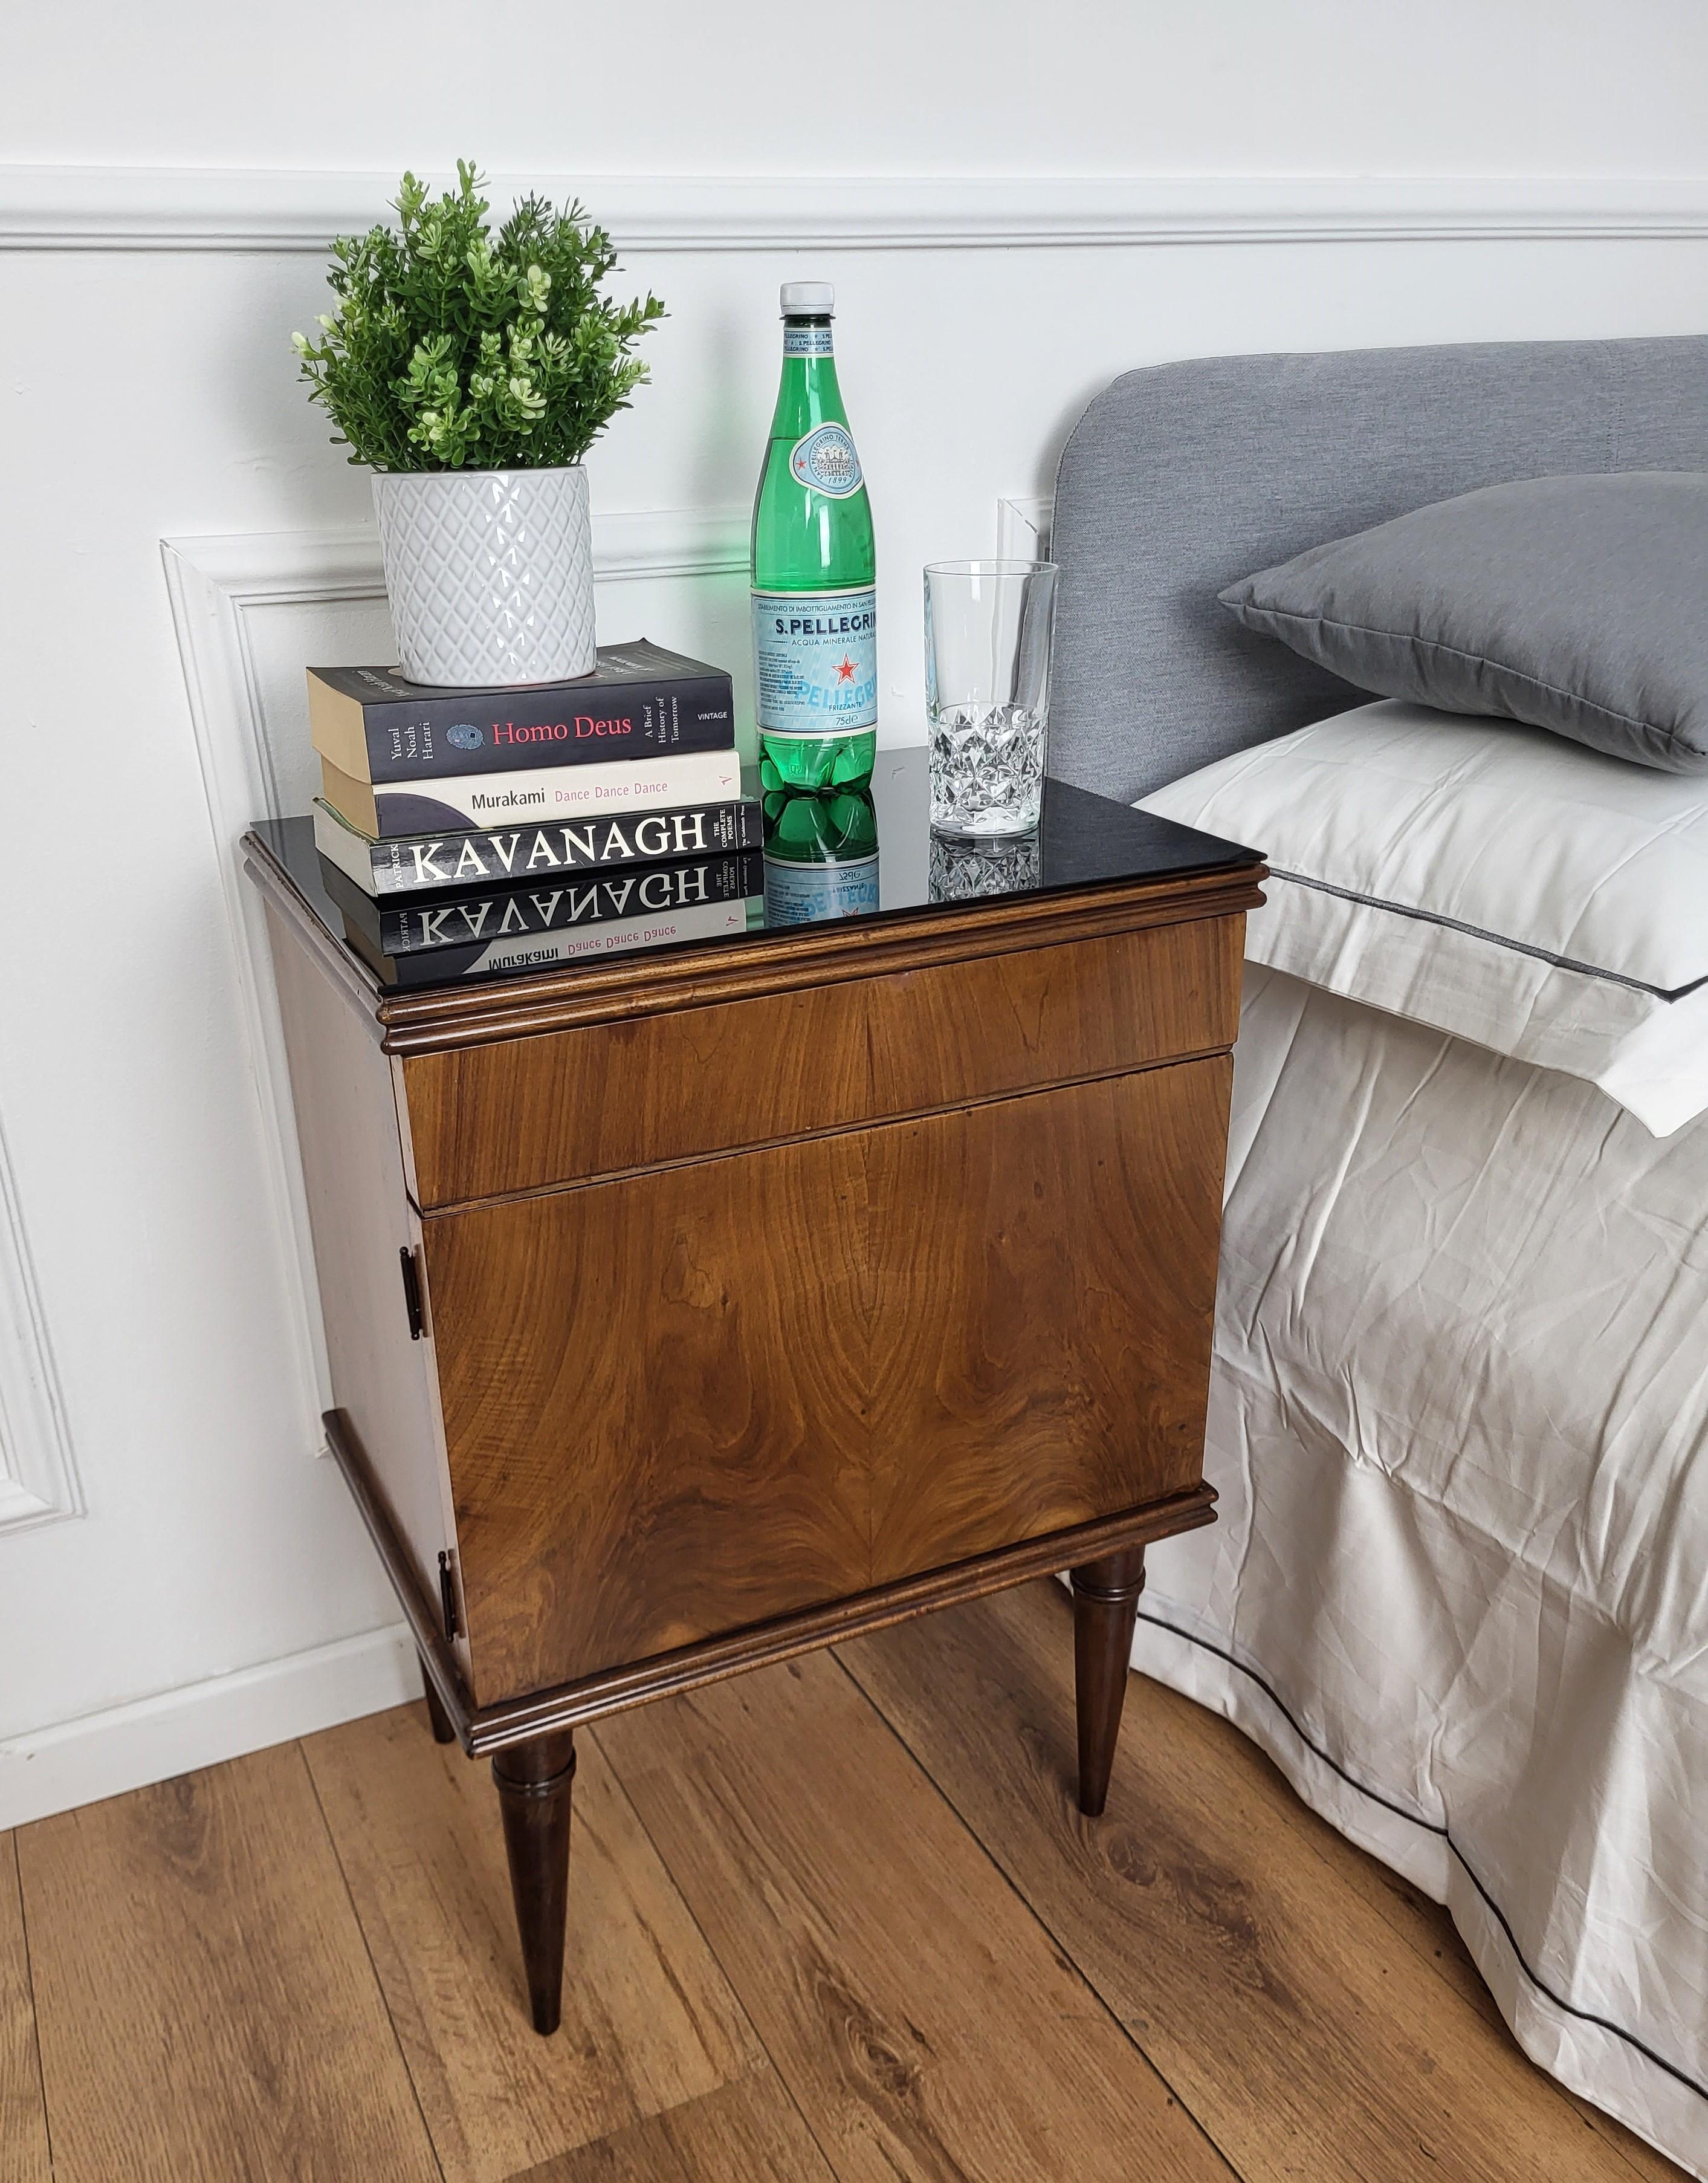 Very elegant and refined Italian 1960s Mid-Century Modern design and geometrical shape, pair of bedside tables in walnut wood, central drawer and front door completed by black glass top. Those nightstands make a great look in any style bedroom, as a